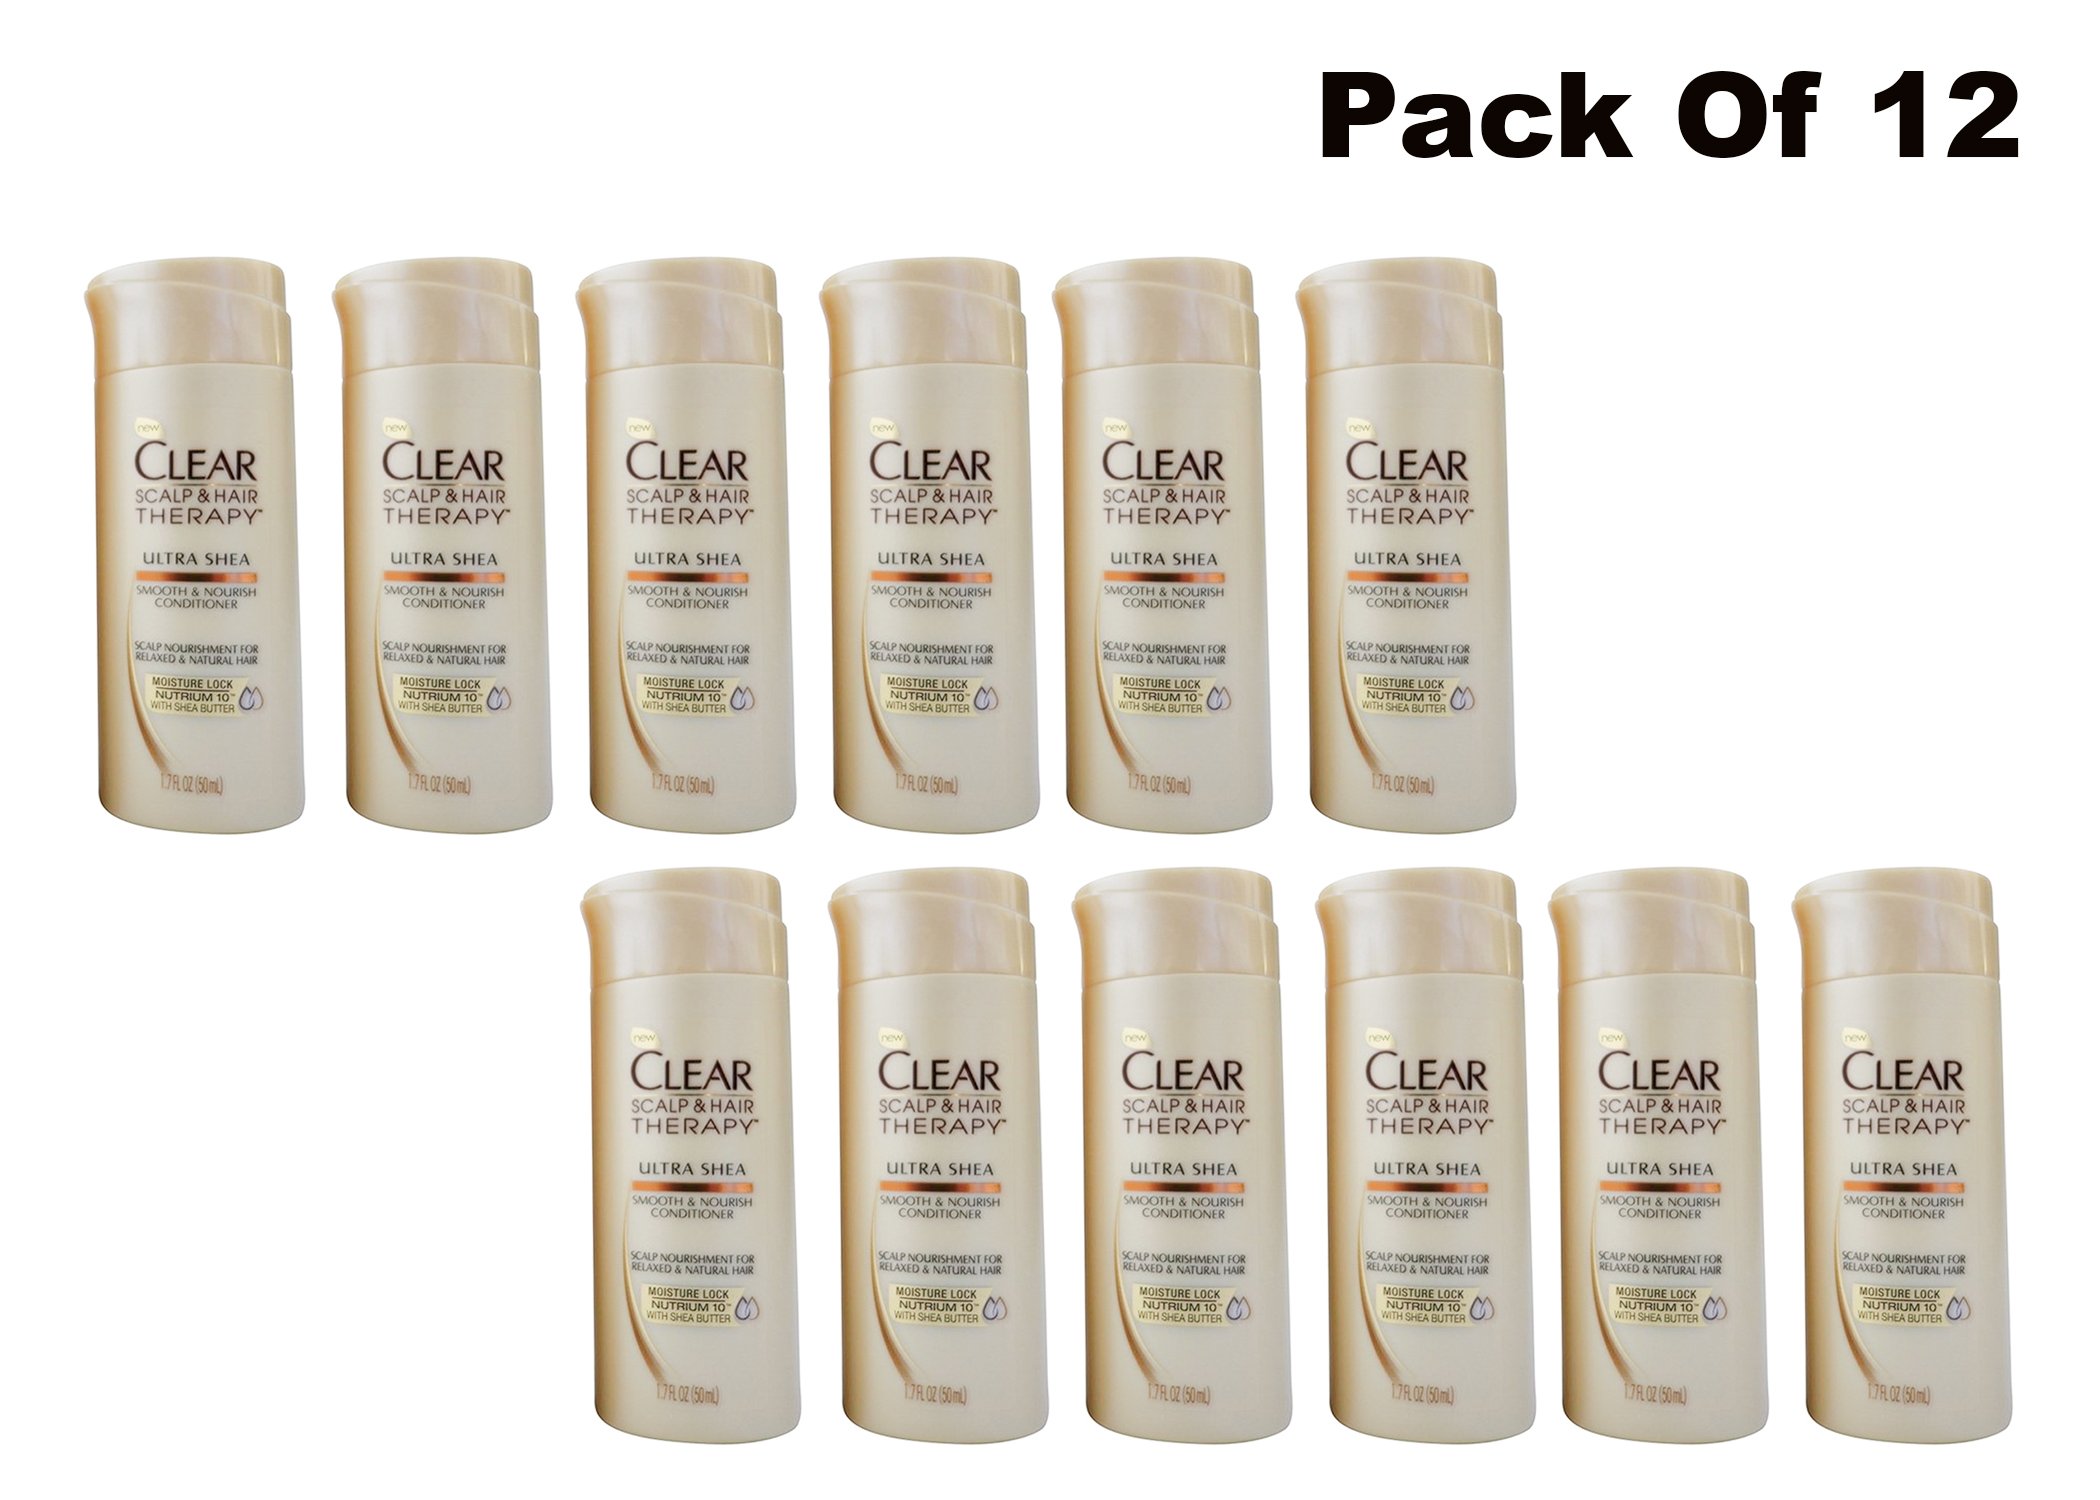 Clear Scalp & Hair Therapy Shea Smooth & Nourish Conditioner 1.7 fl oz 12 Pack - image 1 of 1